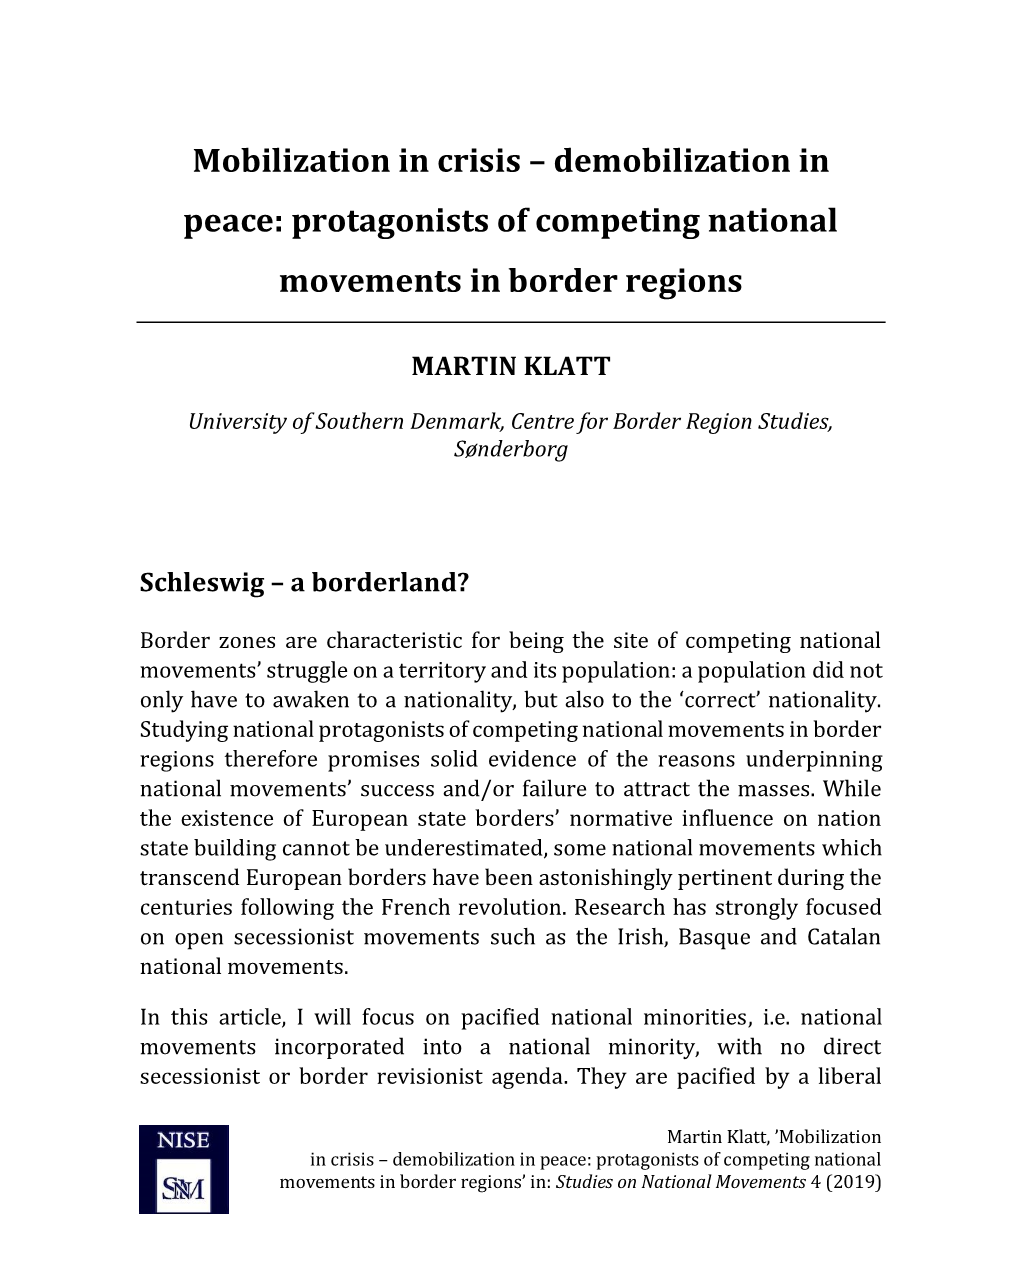 Mobilization in Crisis – Demobilization in Peace: Protagonists of Competing National Movements in Border Regions